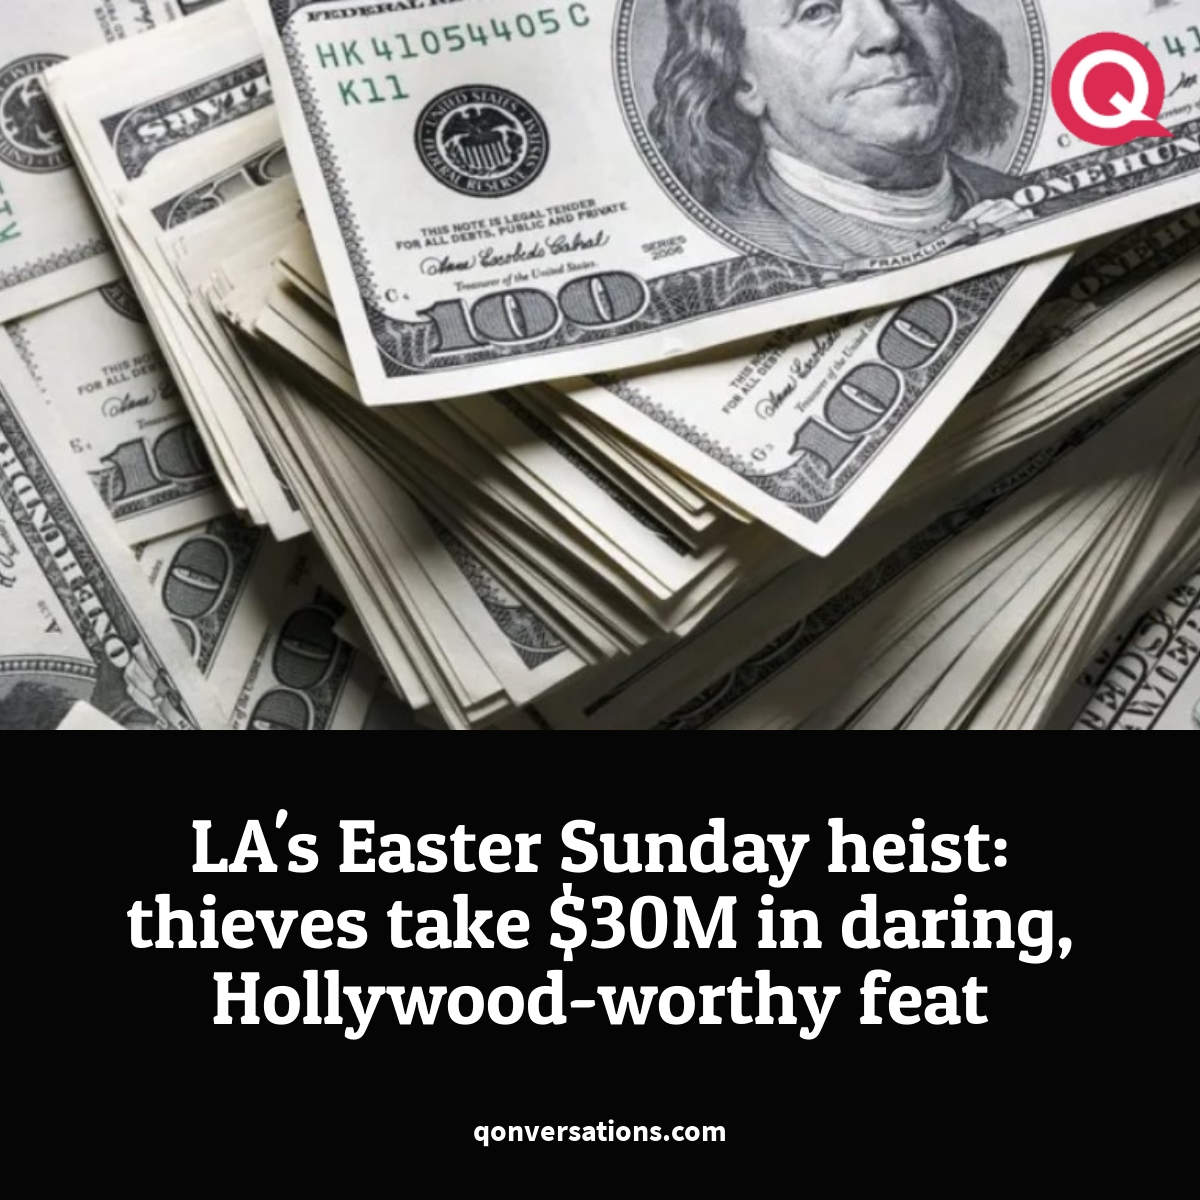 #us #Criminal #weekend Here's what you need to know about the biggest $30M heist in the history of Los Angeles. qonversations.com/las-easter-sun…